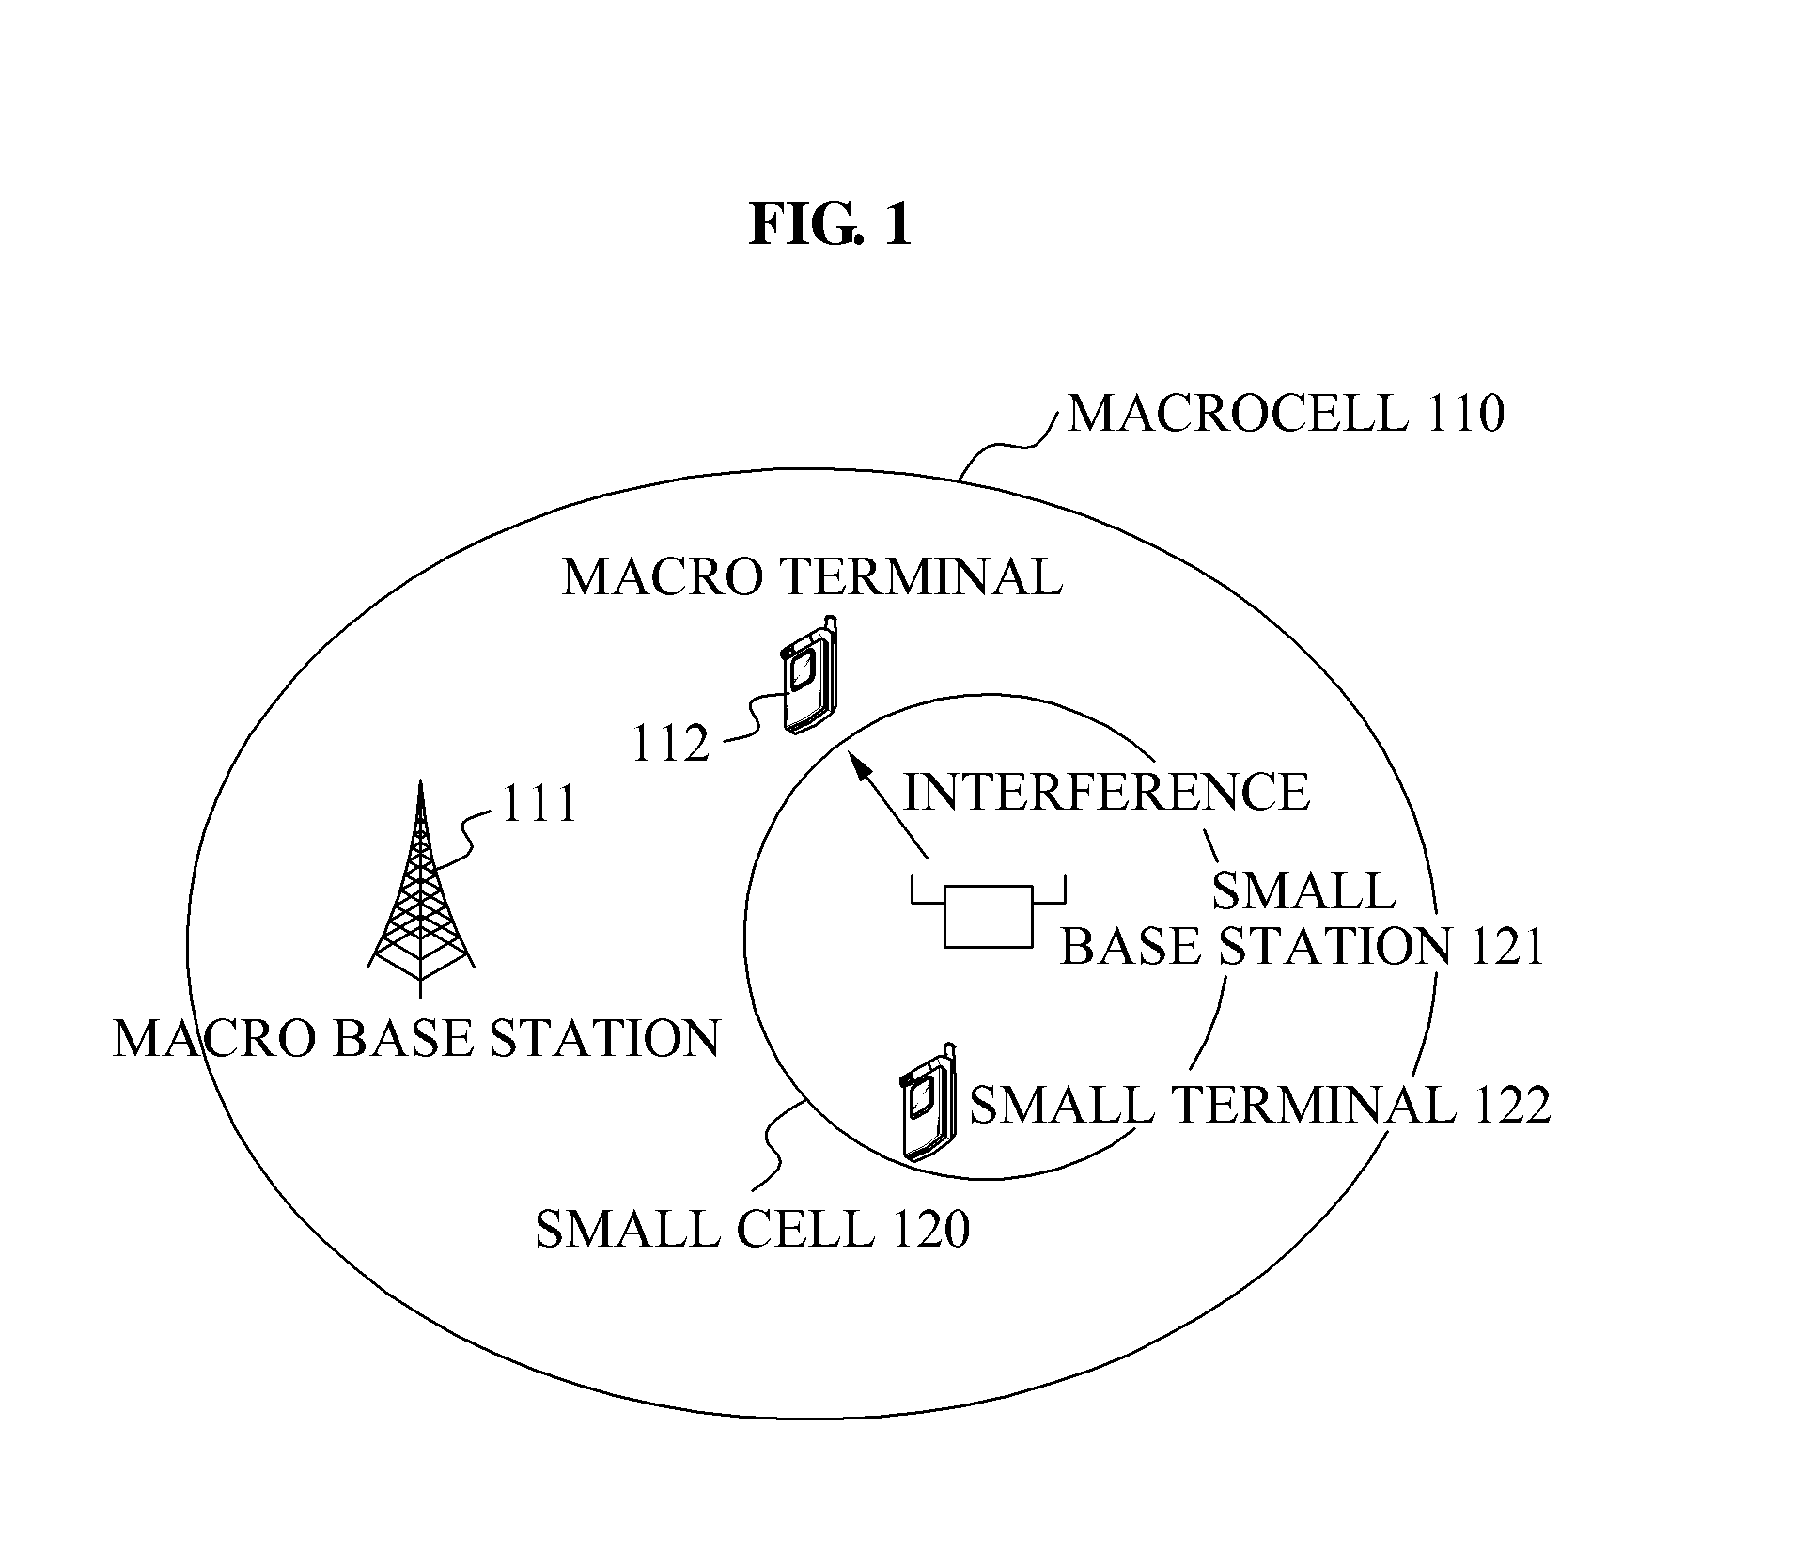 Hierarchical-cell communication system using asymmetric feedback scheme based on class of access network